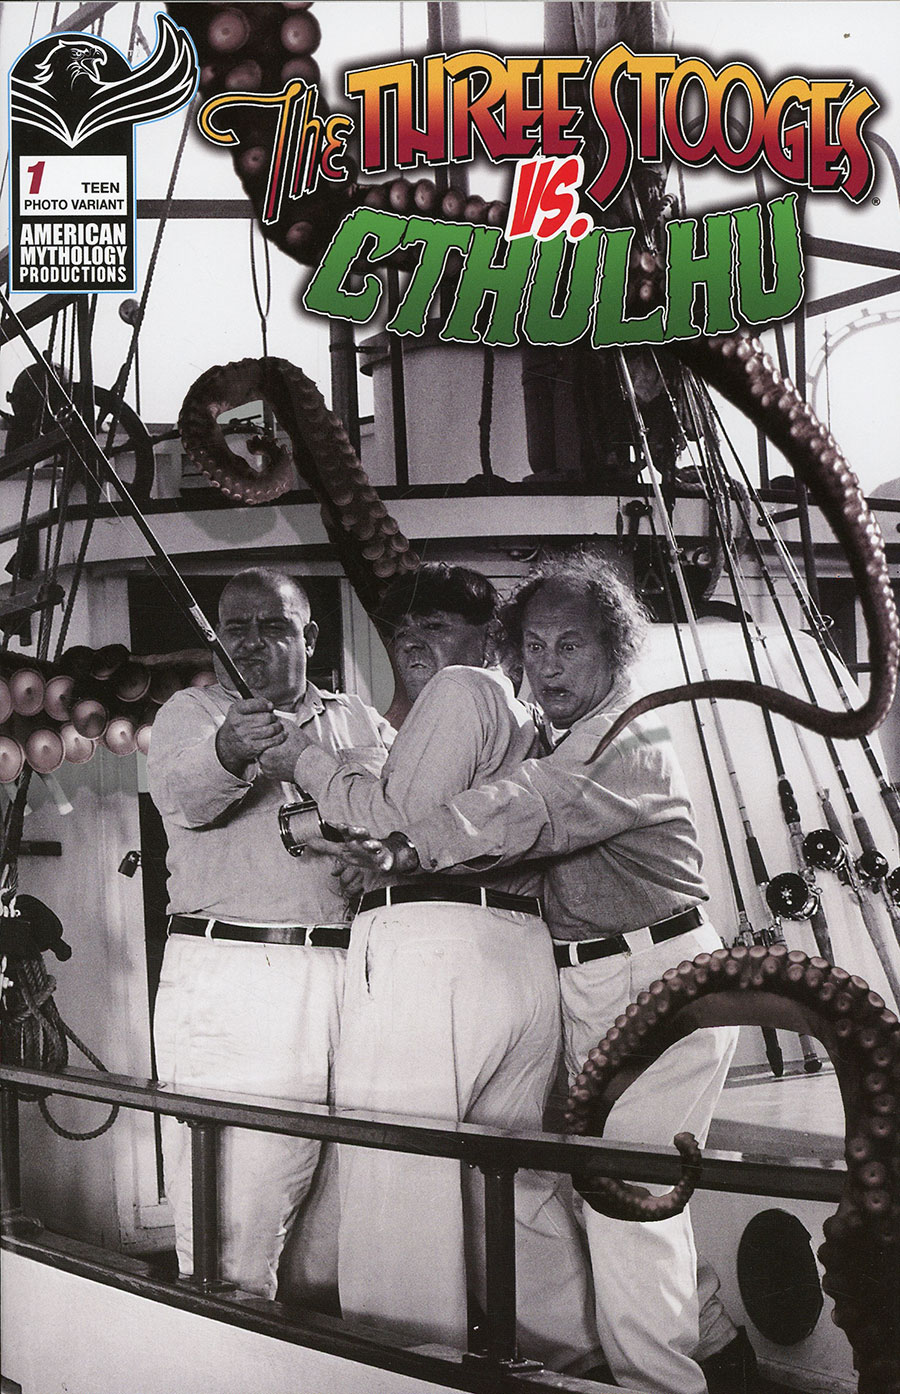 Three Stooges vs Cthulhu #1 Cover D Limited Edition Photo Variant Cover